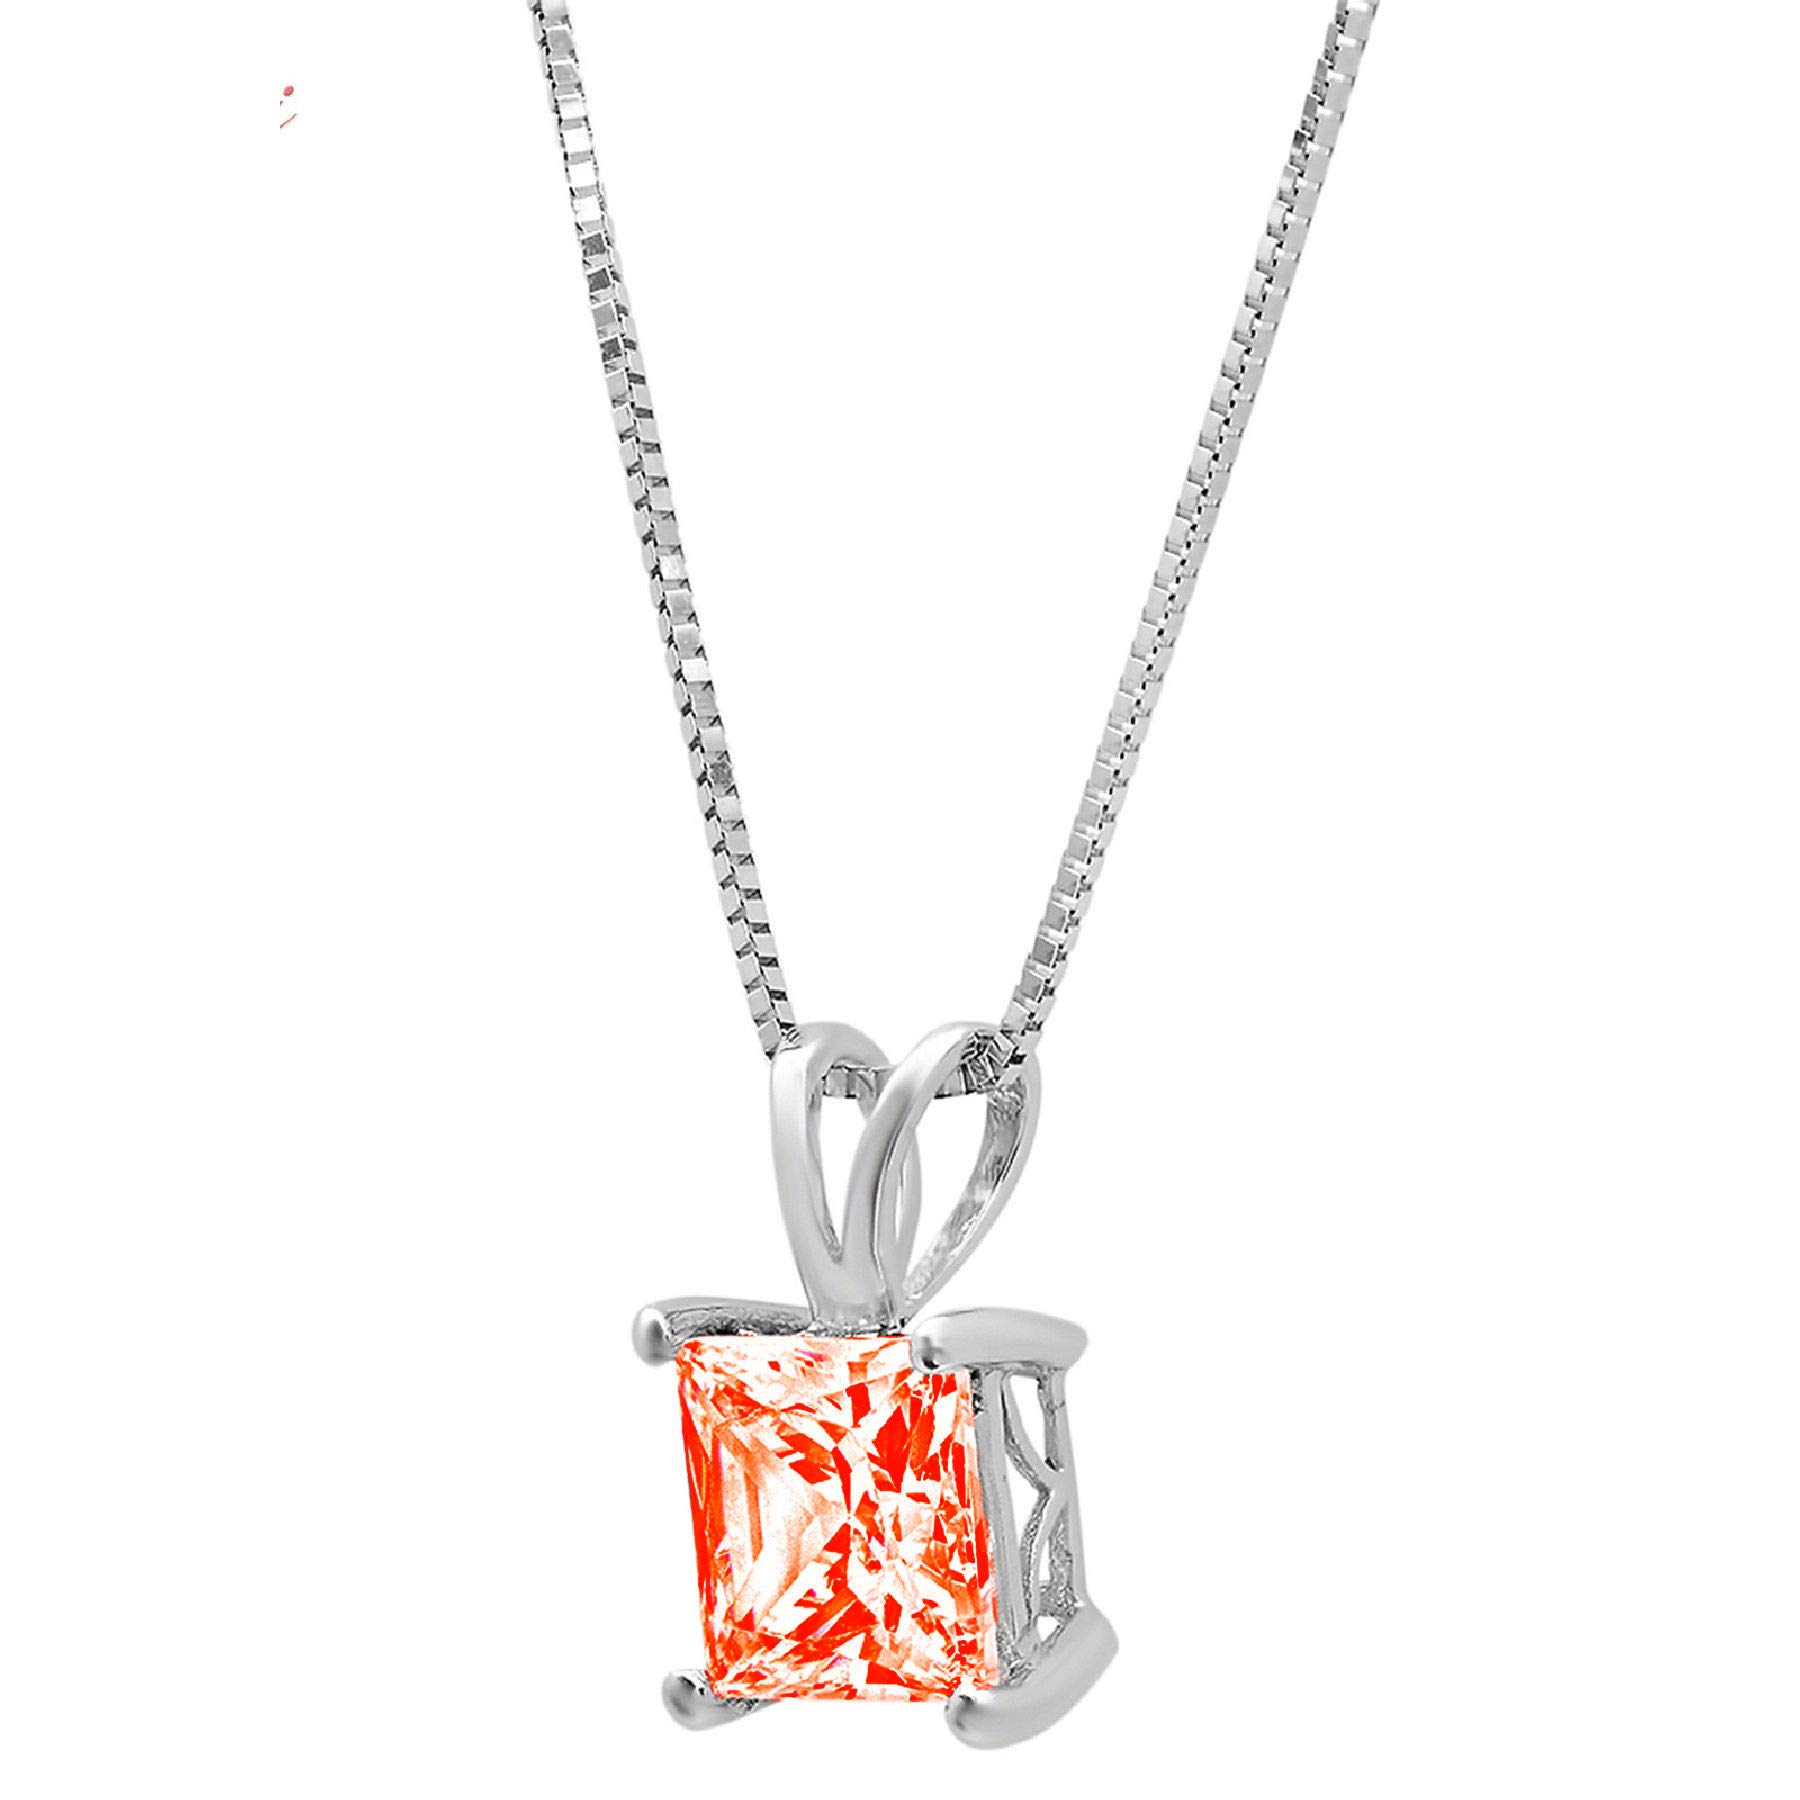 Clara Pucci 3.1 ct Brilliant Princess Cut Stunning Genuine Flawless Red Simulated Diamond Gemstone Solitaire Pendant Necklace With 18